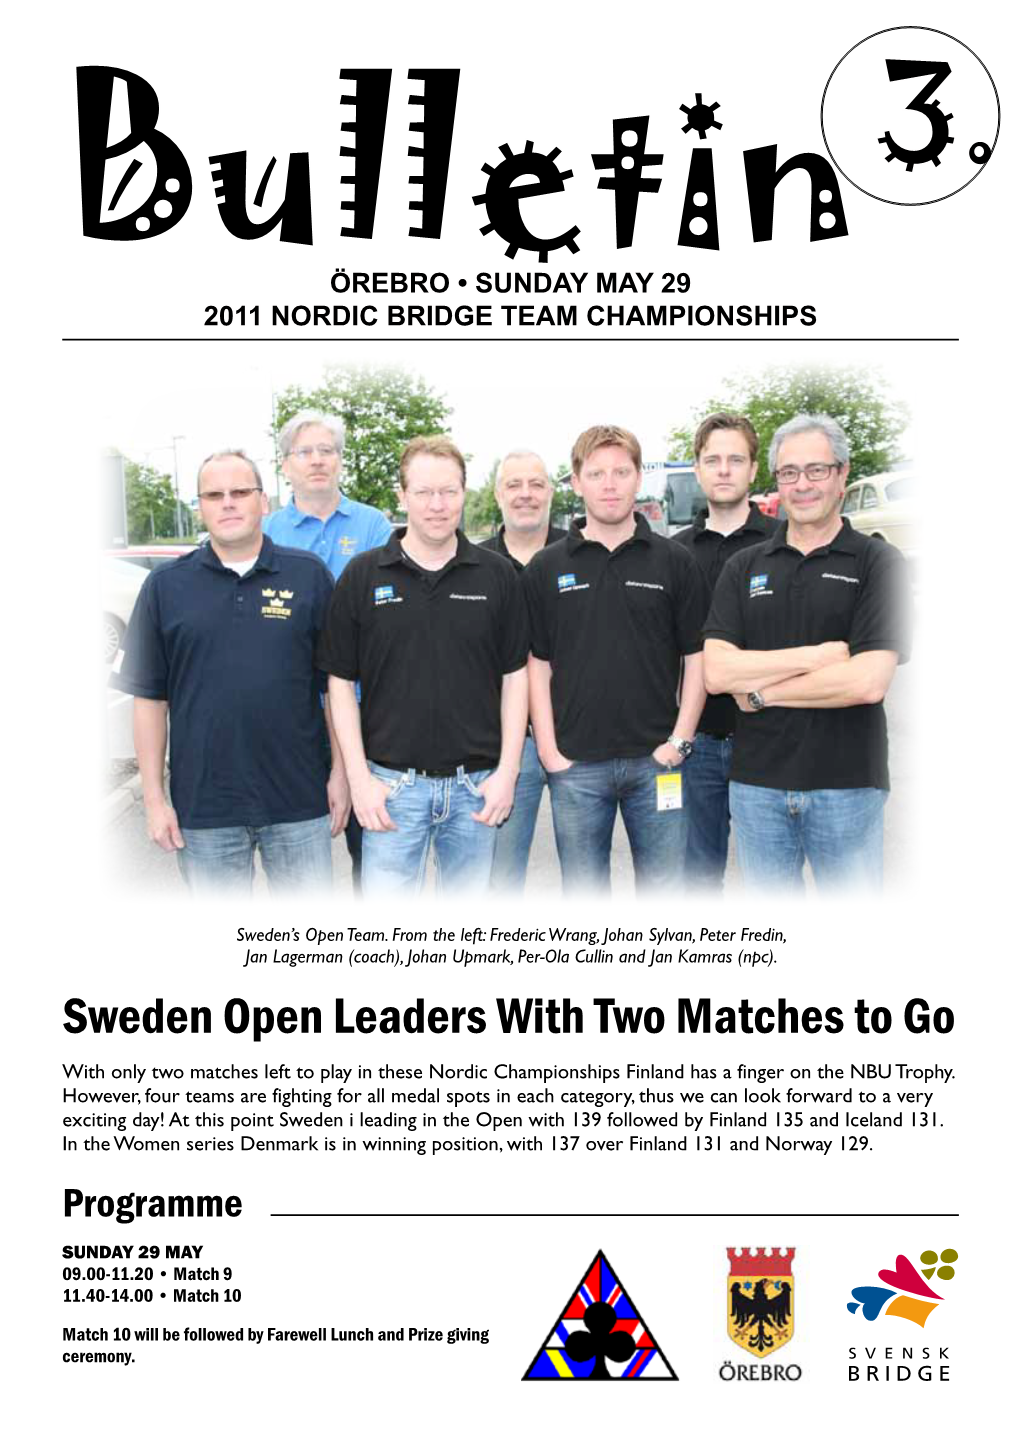 Sweden Open Leaders with Two Matches to Go with Only Two Matches Left to Play in These Nordic Championships Finland Has a Finger on the NBU Trophy